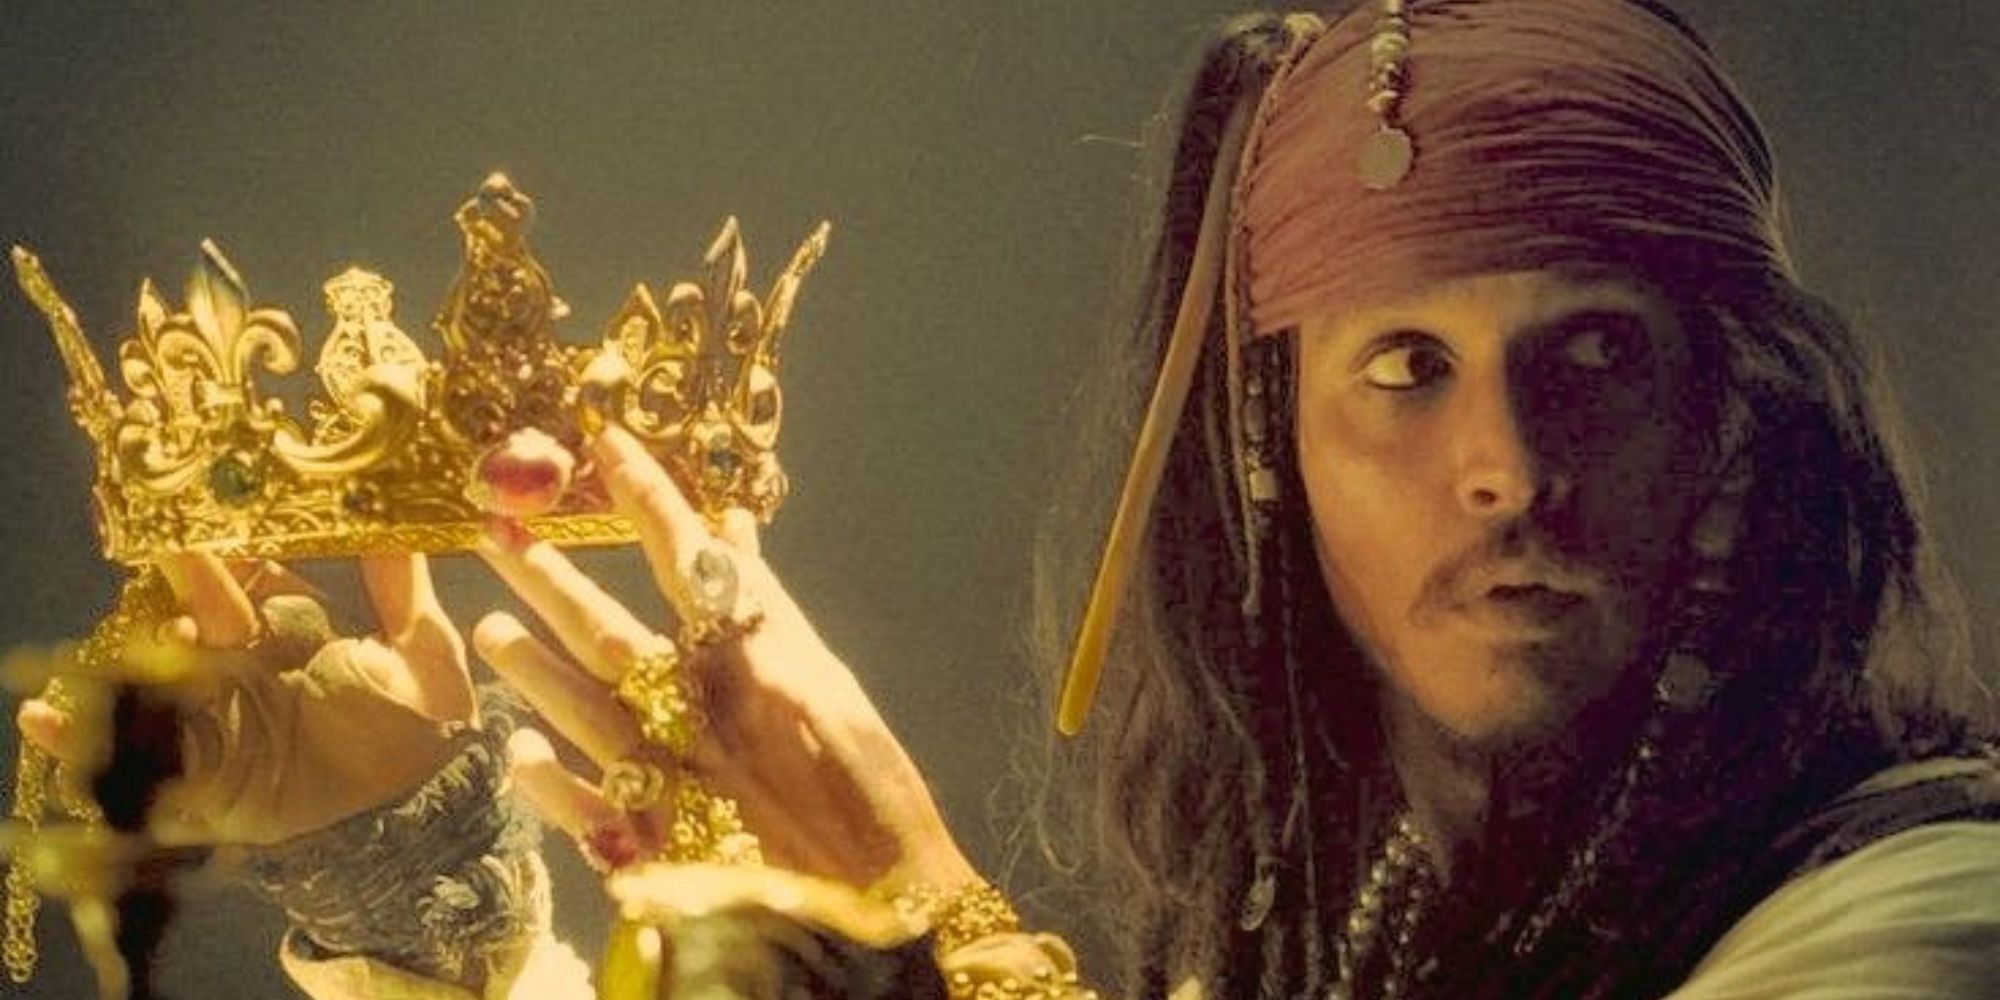 Jack Sparrow holding a gold crown in Pirates of the Caribbean The Curse of the Black Pearl